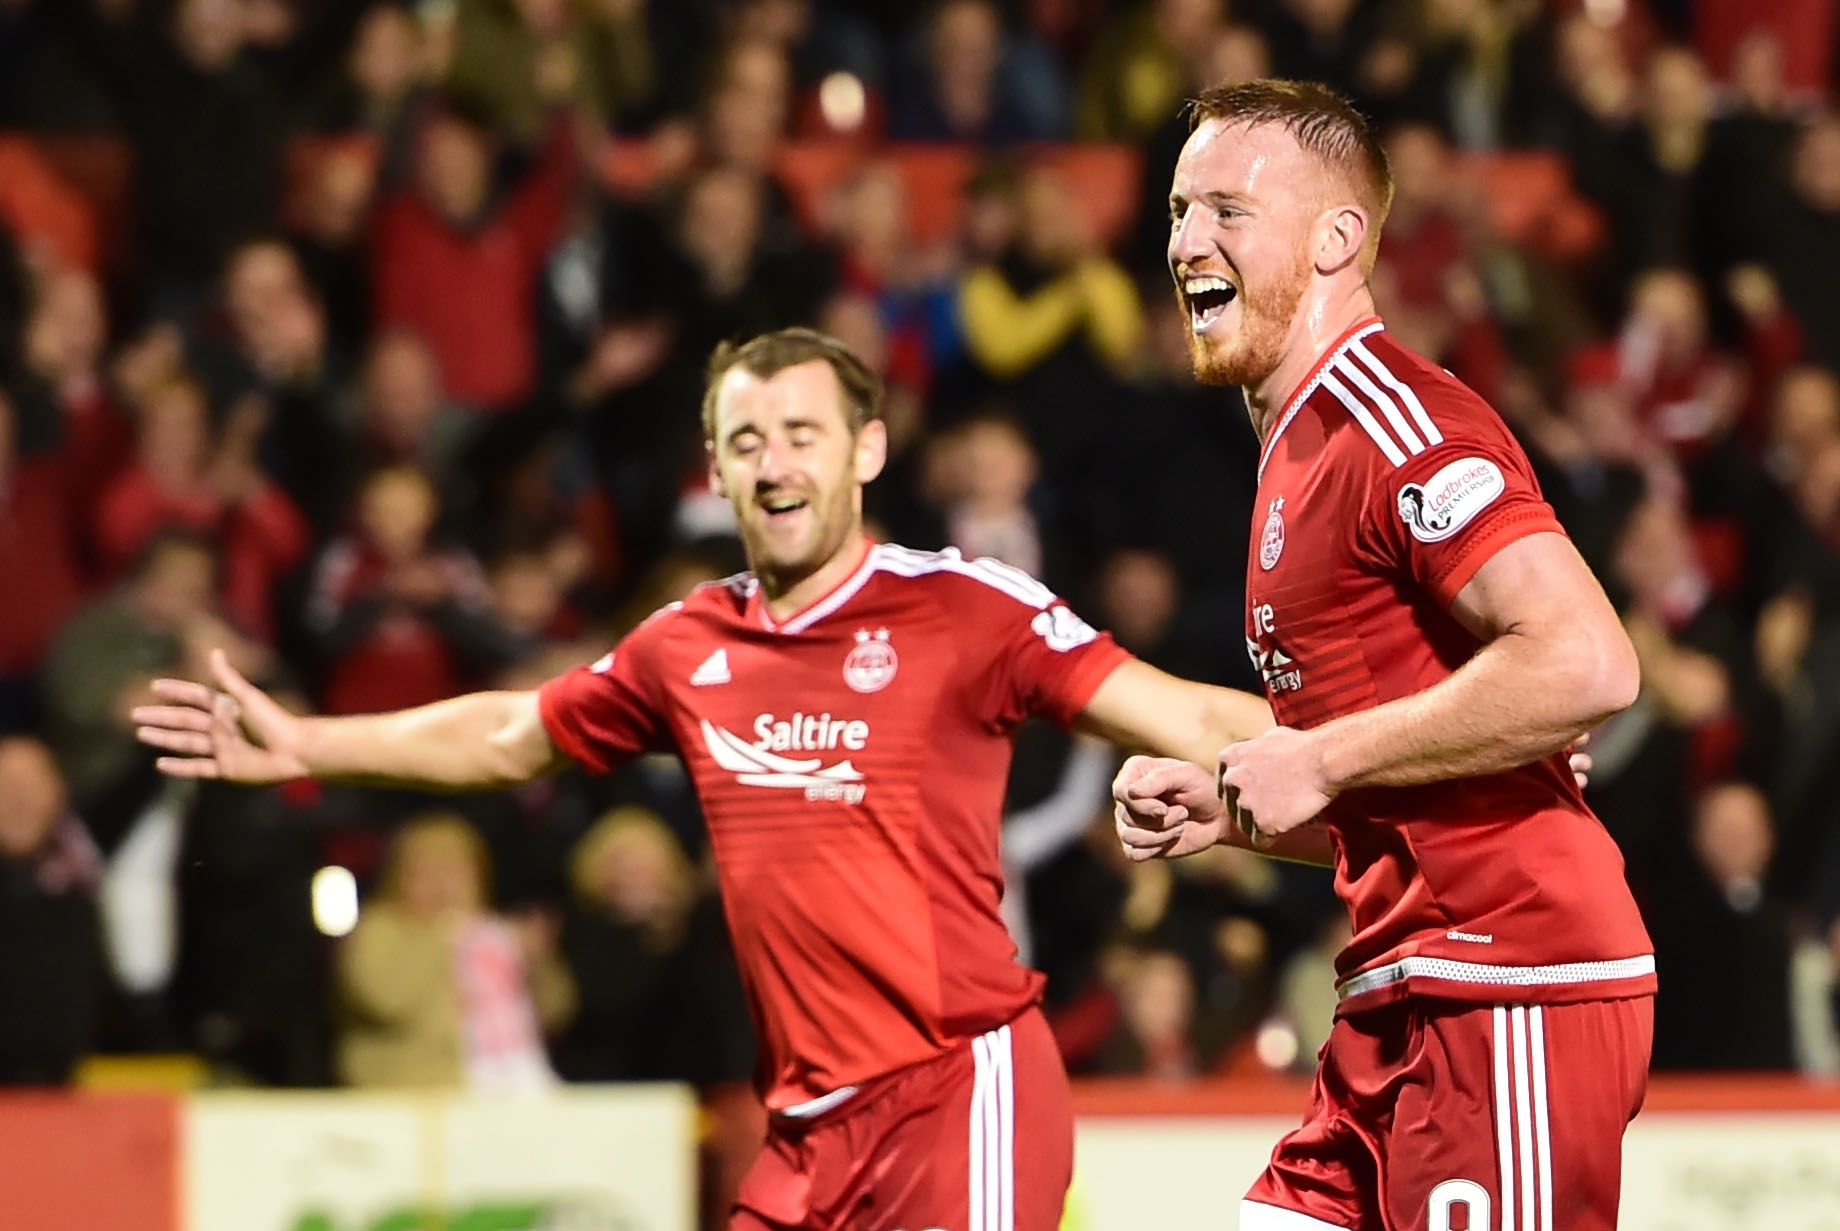 Aberdeen's Adam Rooney (right) celebrates having fired home from the penalty spot to put his side ahead